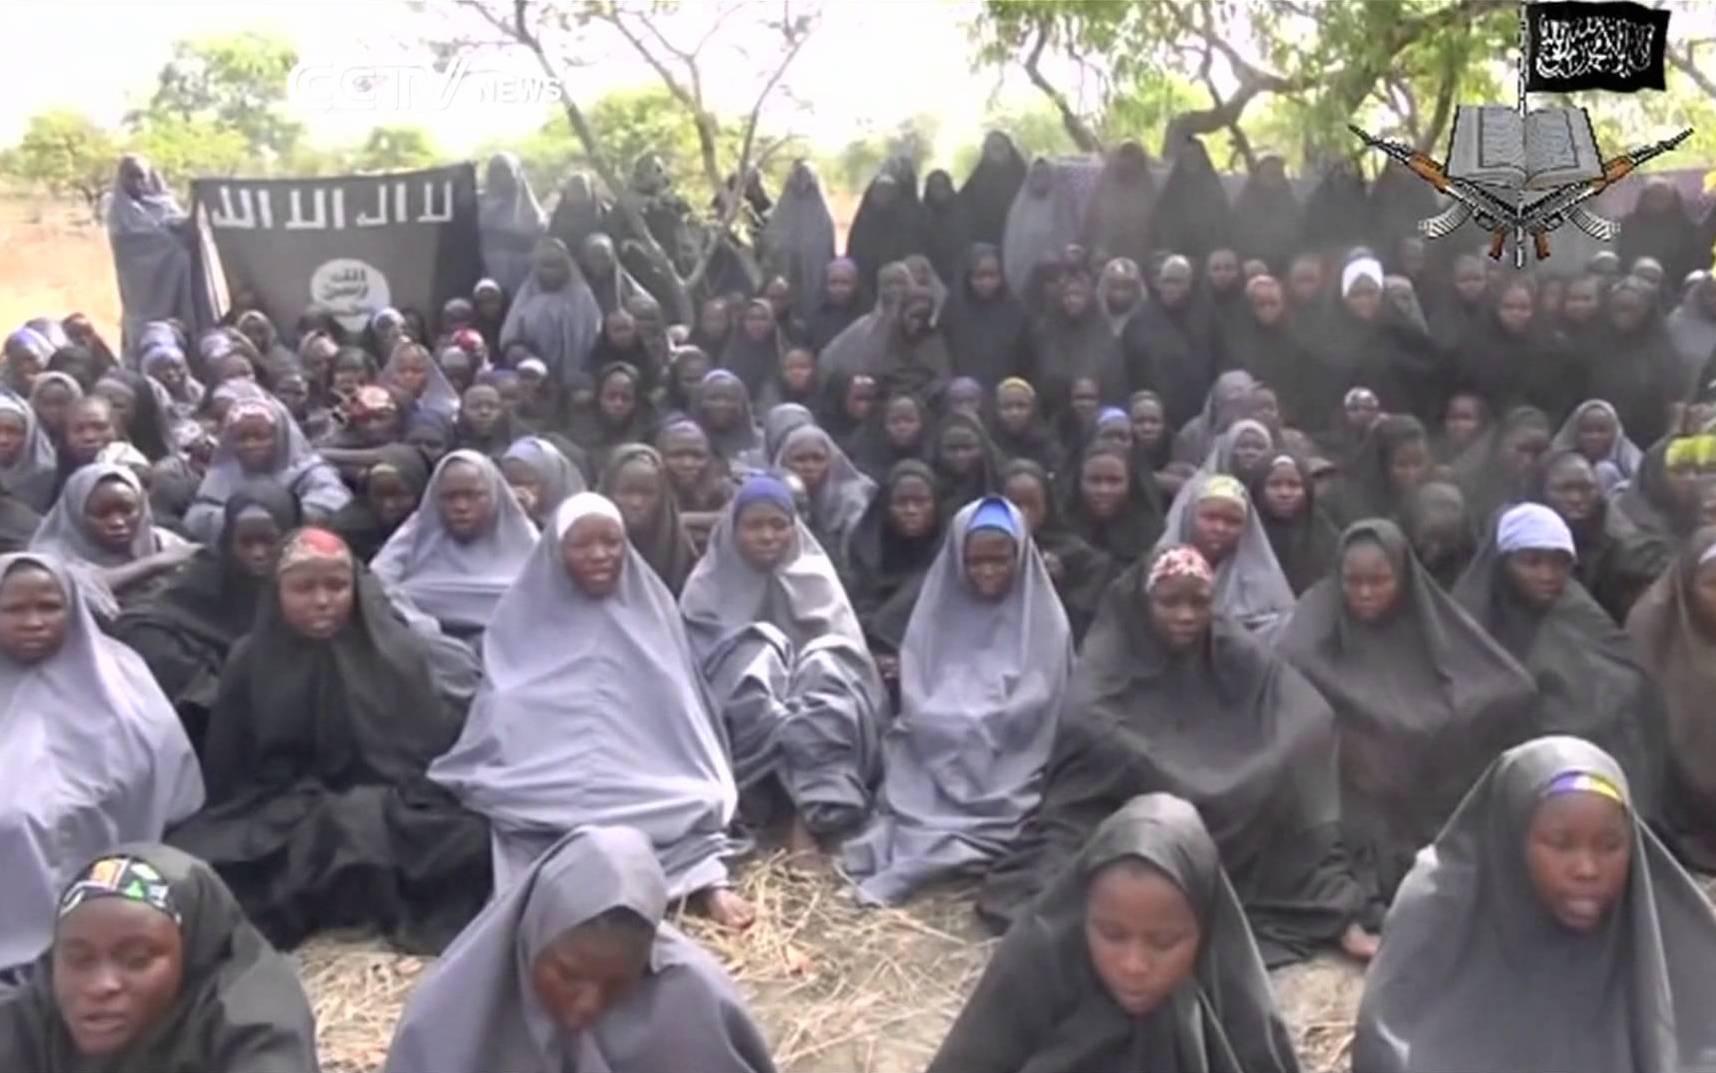 A few weeks after the girls were taken – when Boko Haram broadcast images of its captives – they had faces